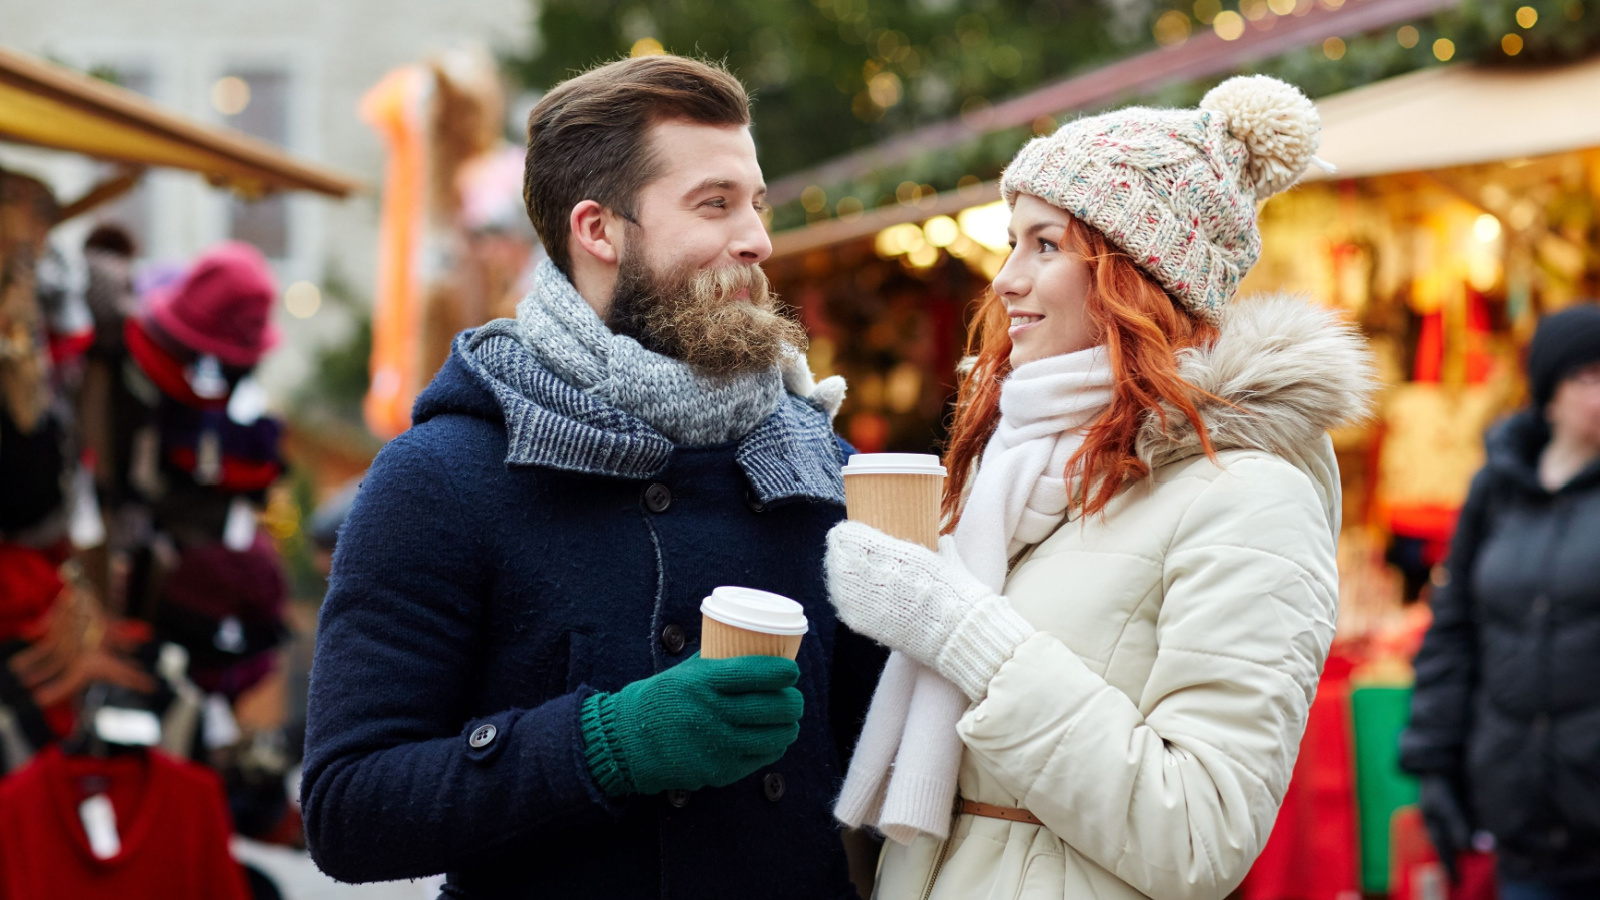 image credit: Ground-Picture/shutterstock <p>A scarf or pashmina is a versatile item that can act as a blanket, a pillow, or a fashion accessory. It’s perfect for staying warm and can add a pop of color to your travel outfit. Plus, it’s easy to pack and lightweight.</p>